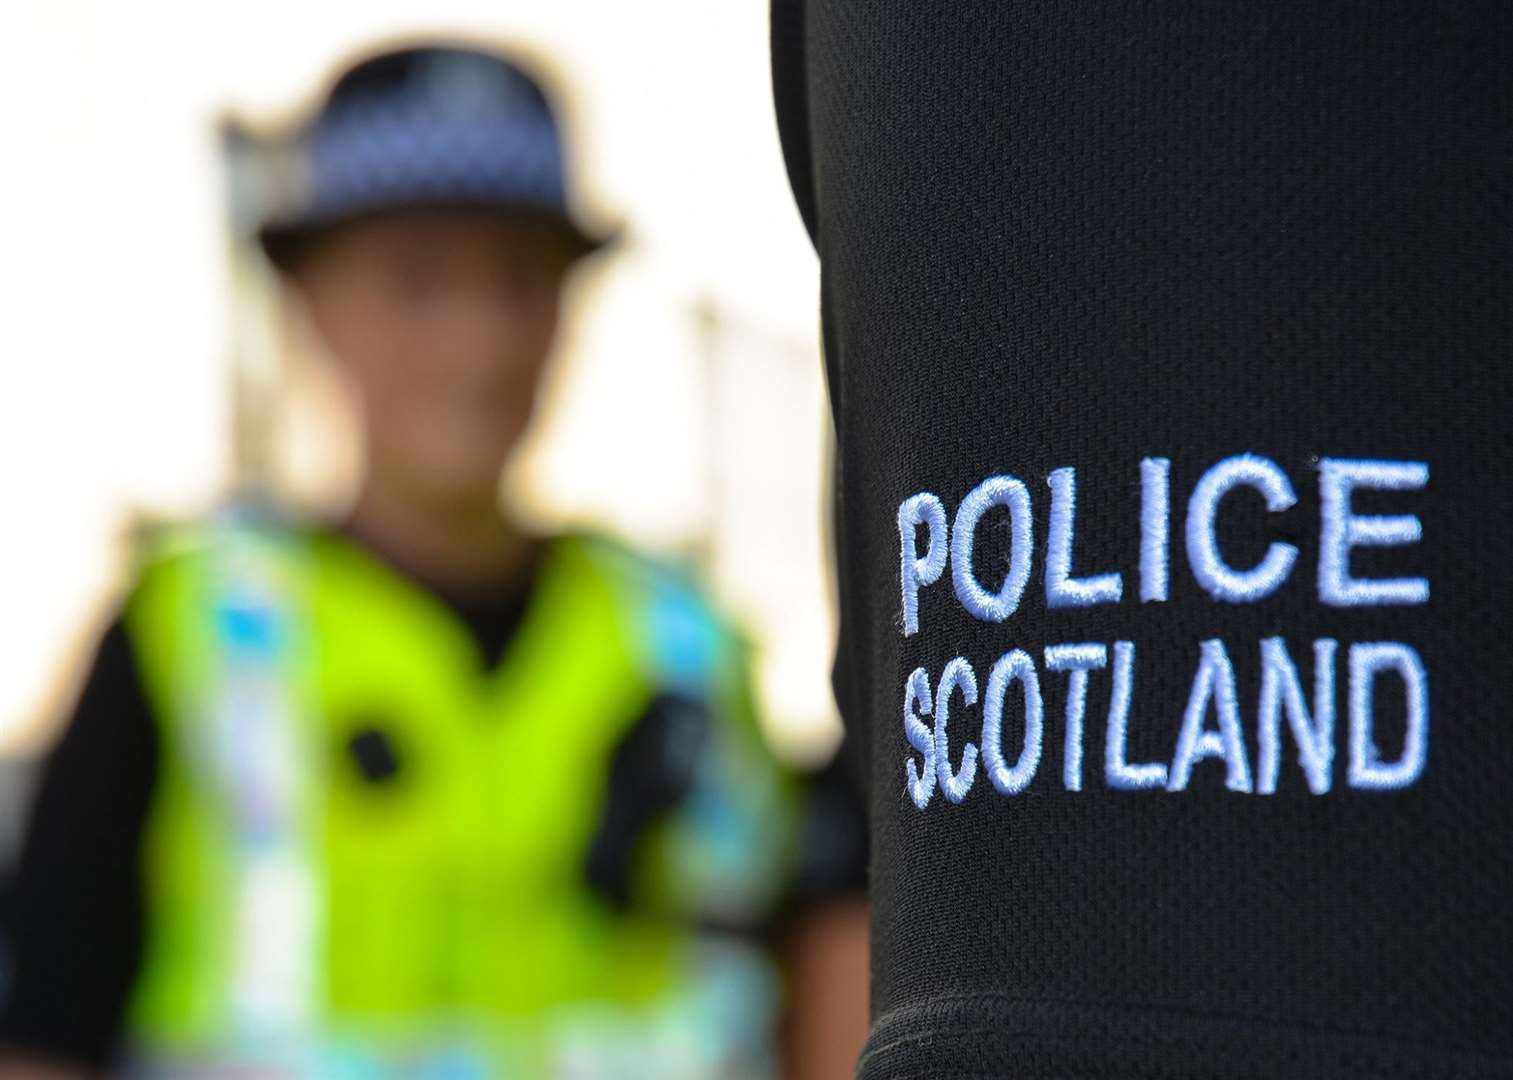 The Highlands and Islands is one of the safest places to live but there are problems with serious crimes, according to the new divisional commander for Police Scotland.